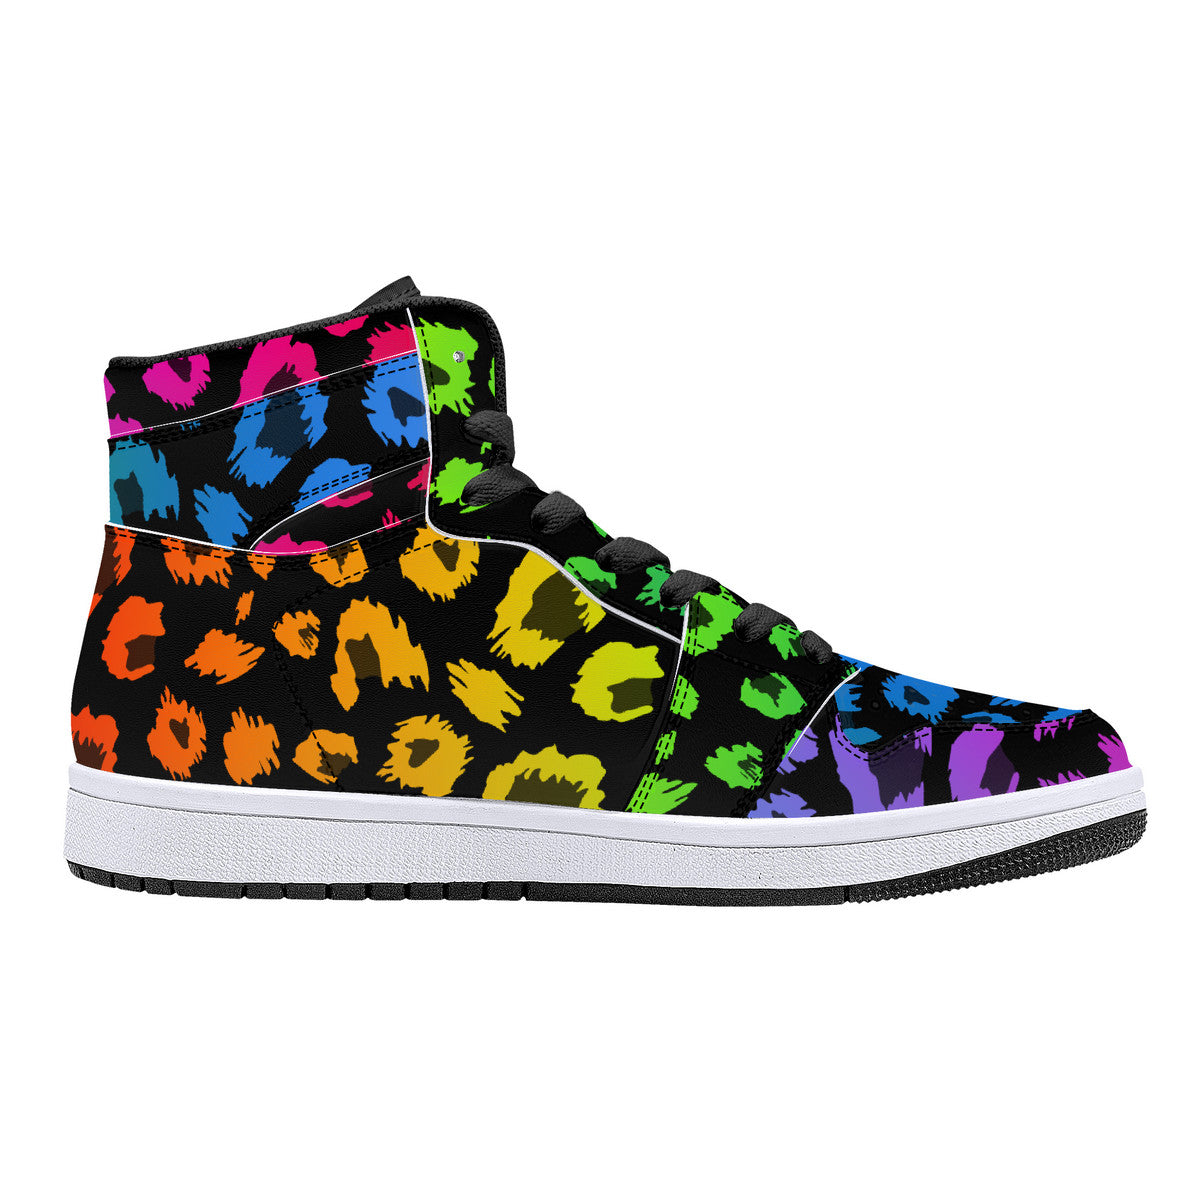 "Jaguar" High-Top Synthetic Leather Sneakers